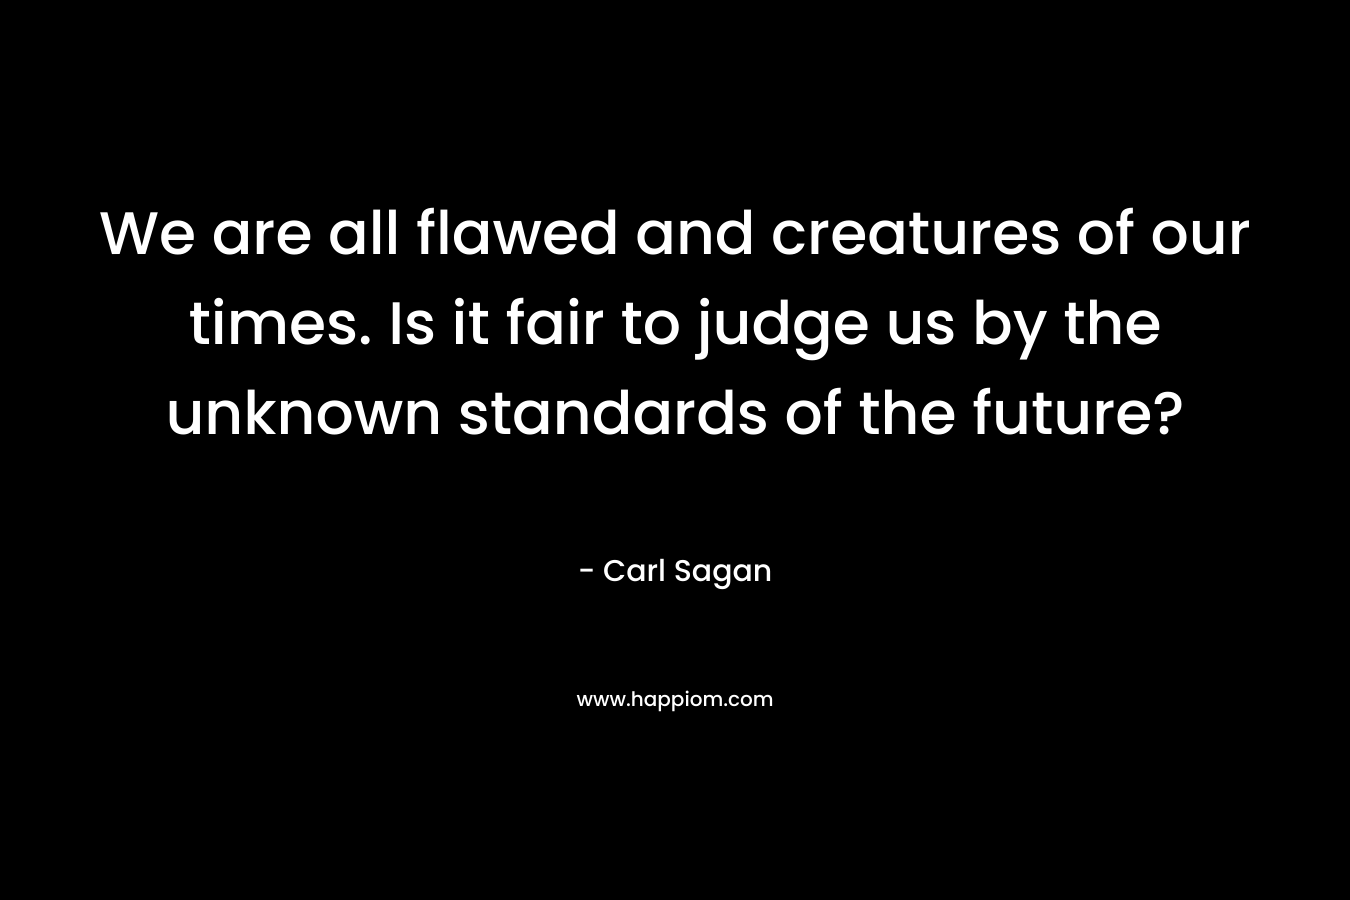 We are all flawed and creatures of our times. Is it fair to judge us by the unknown standards of the future?